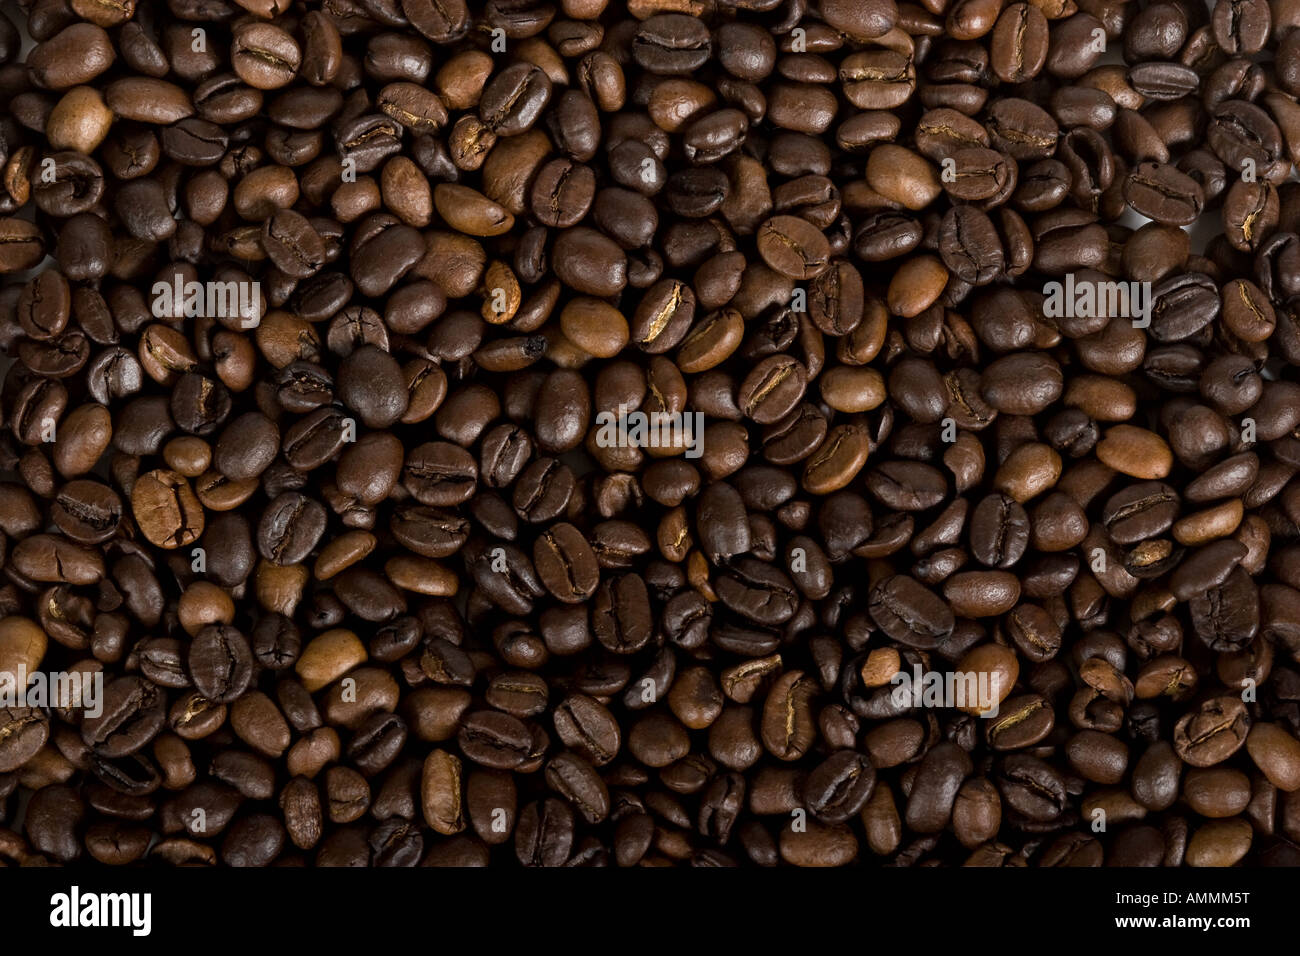 A coffee beans pattern background Stock Photo